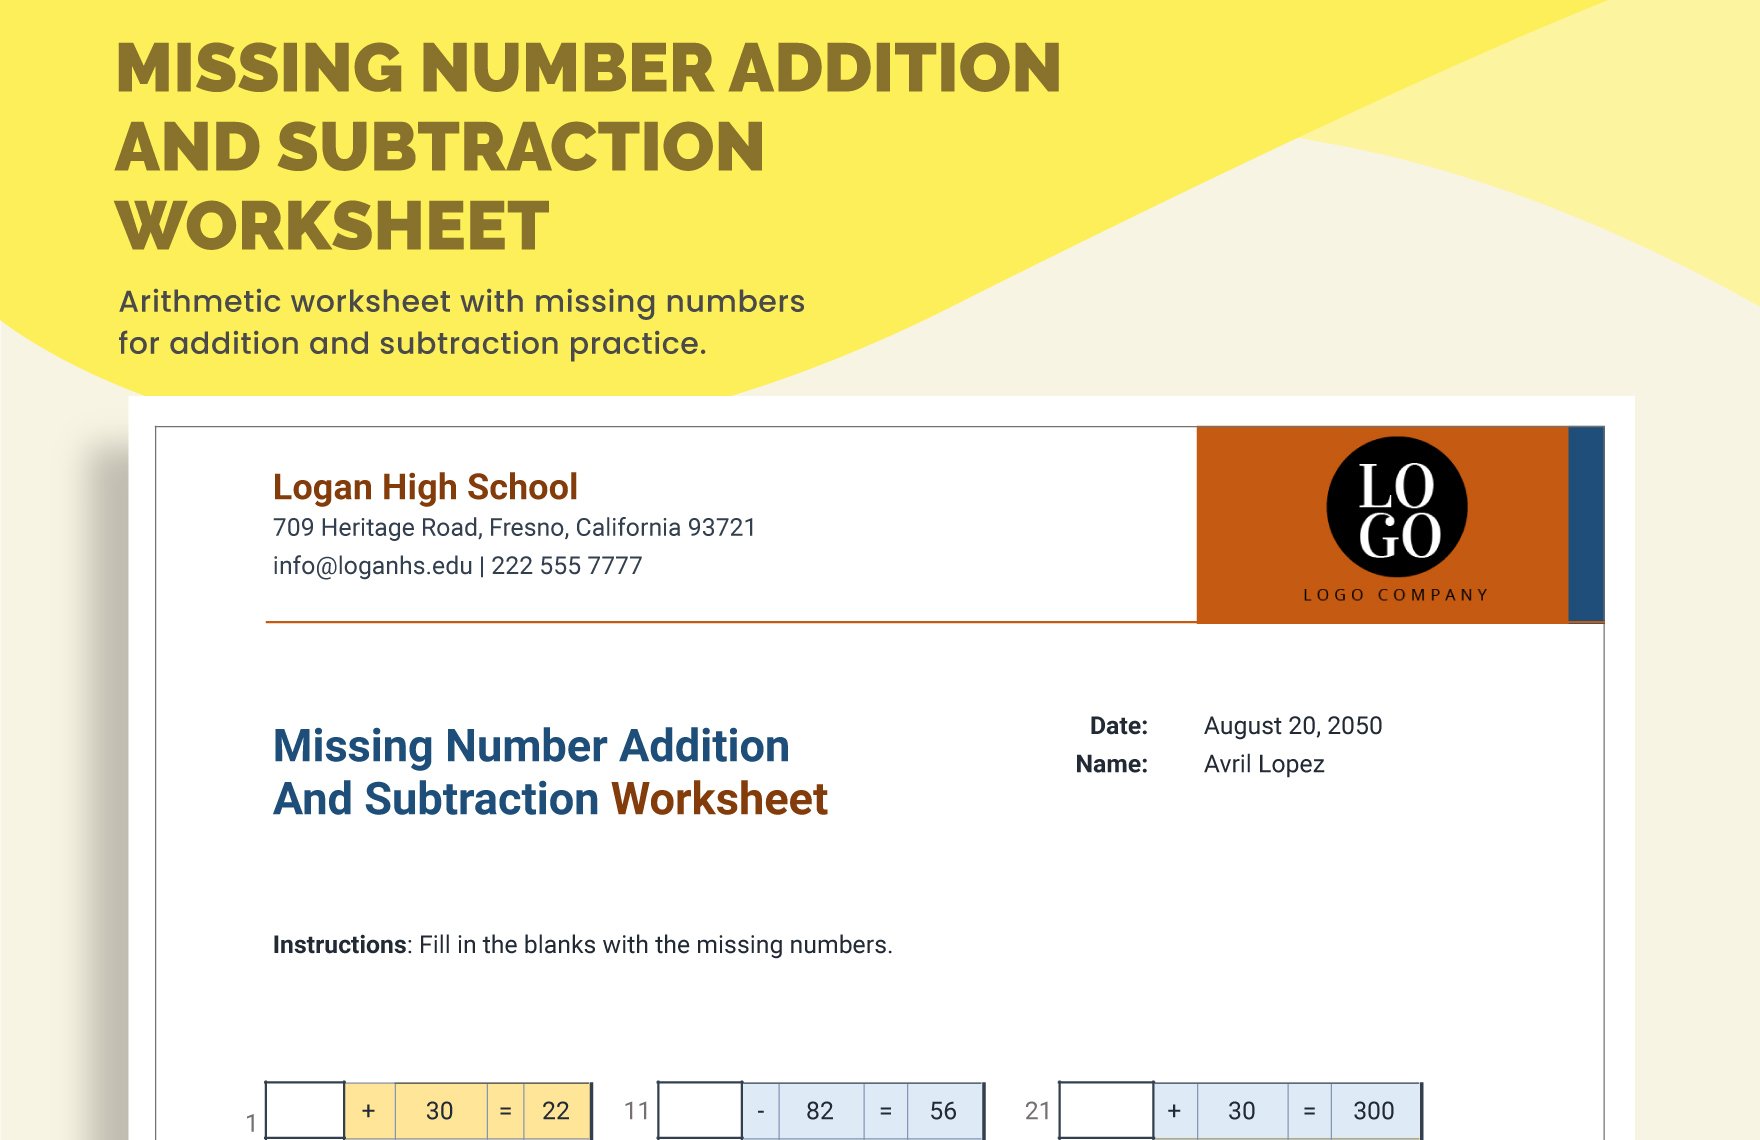 Missing Number Addition And Subtraction Worksheet in Excel, Google Sheets